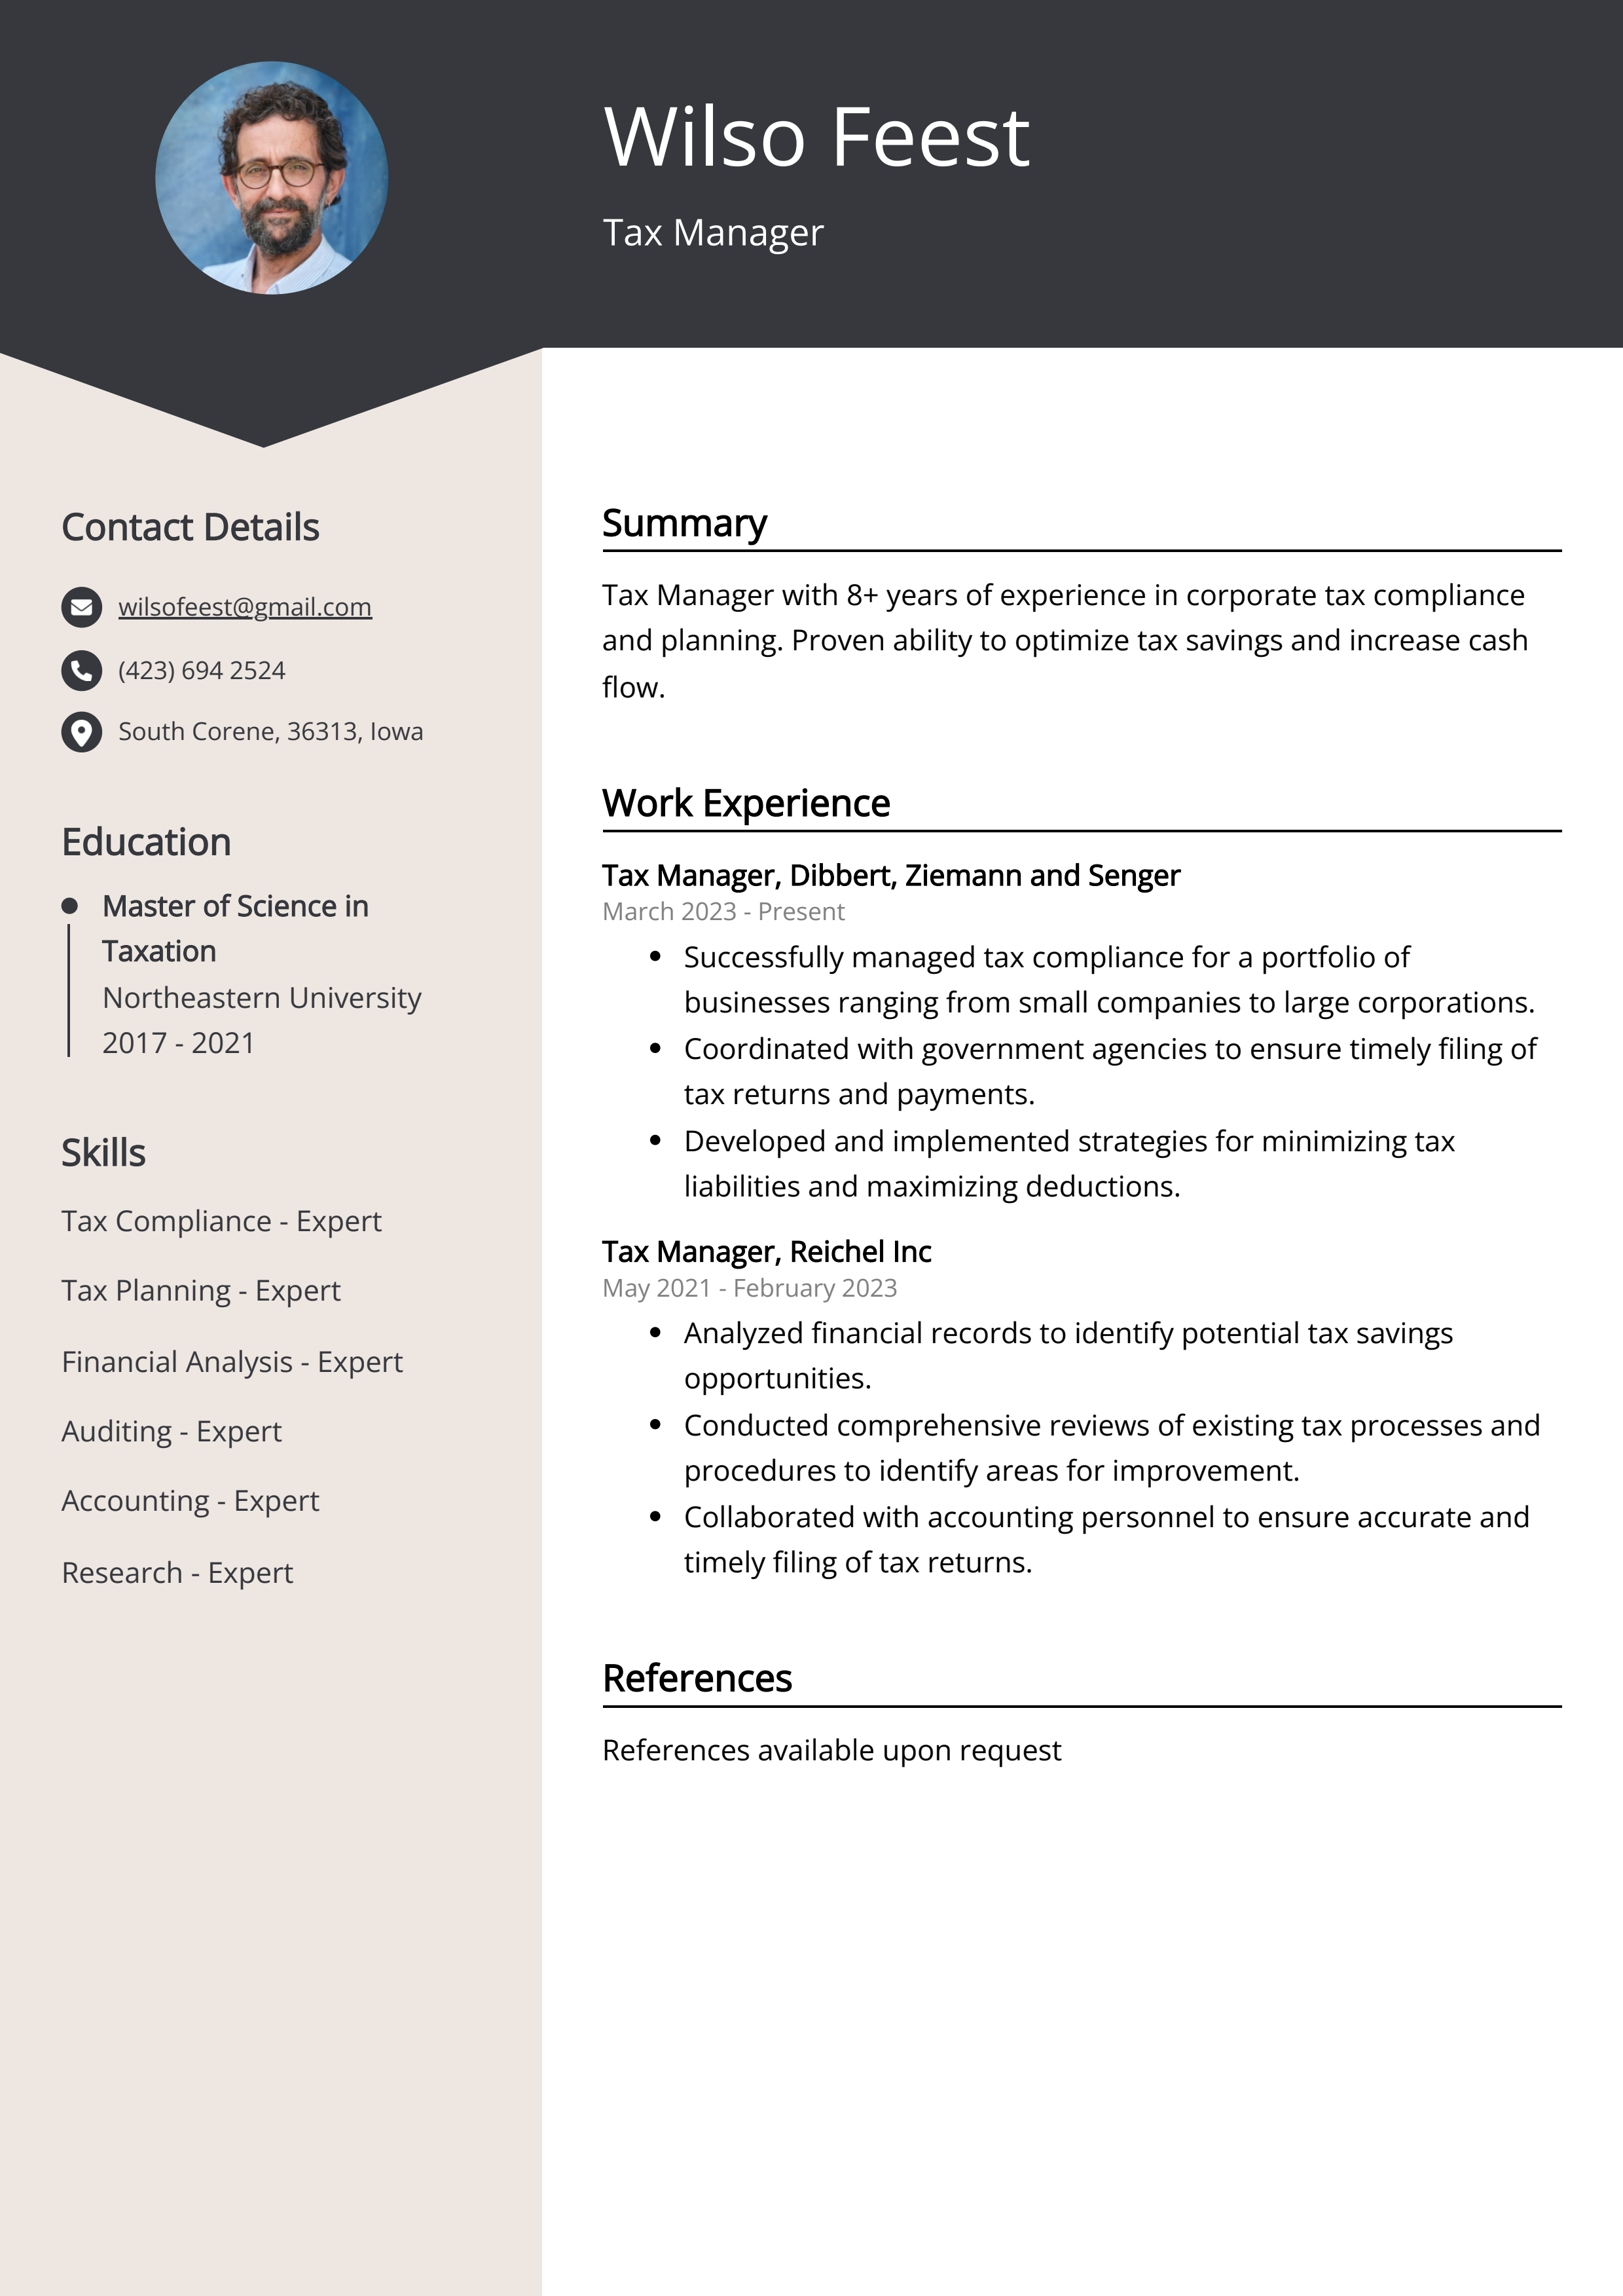 Tax Manager CV Example